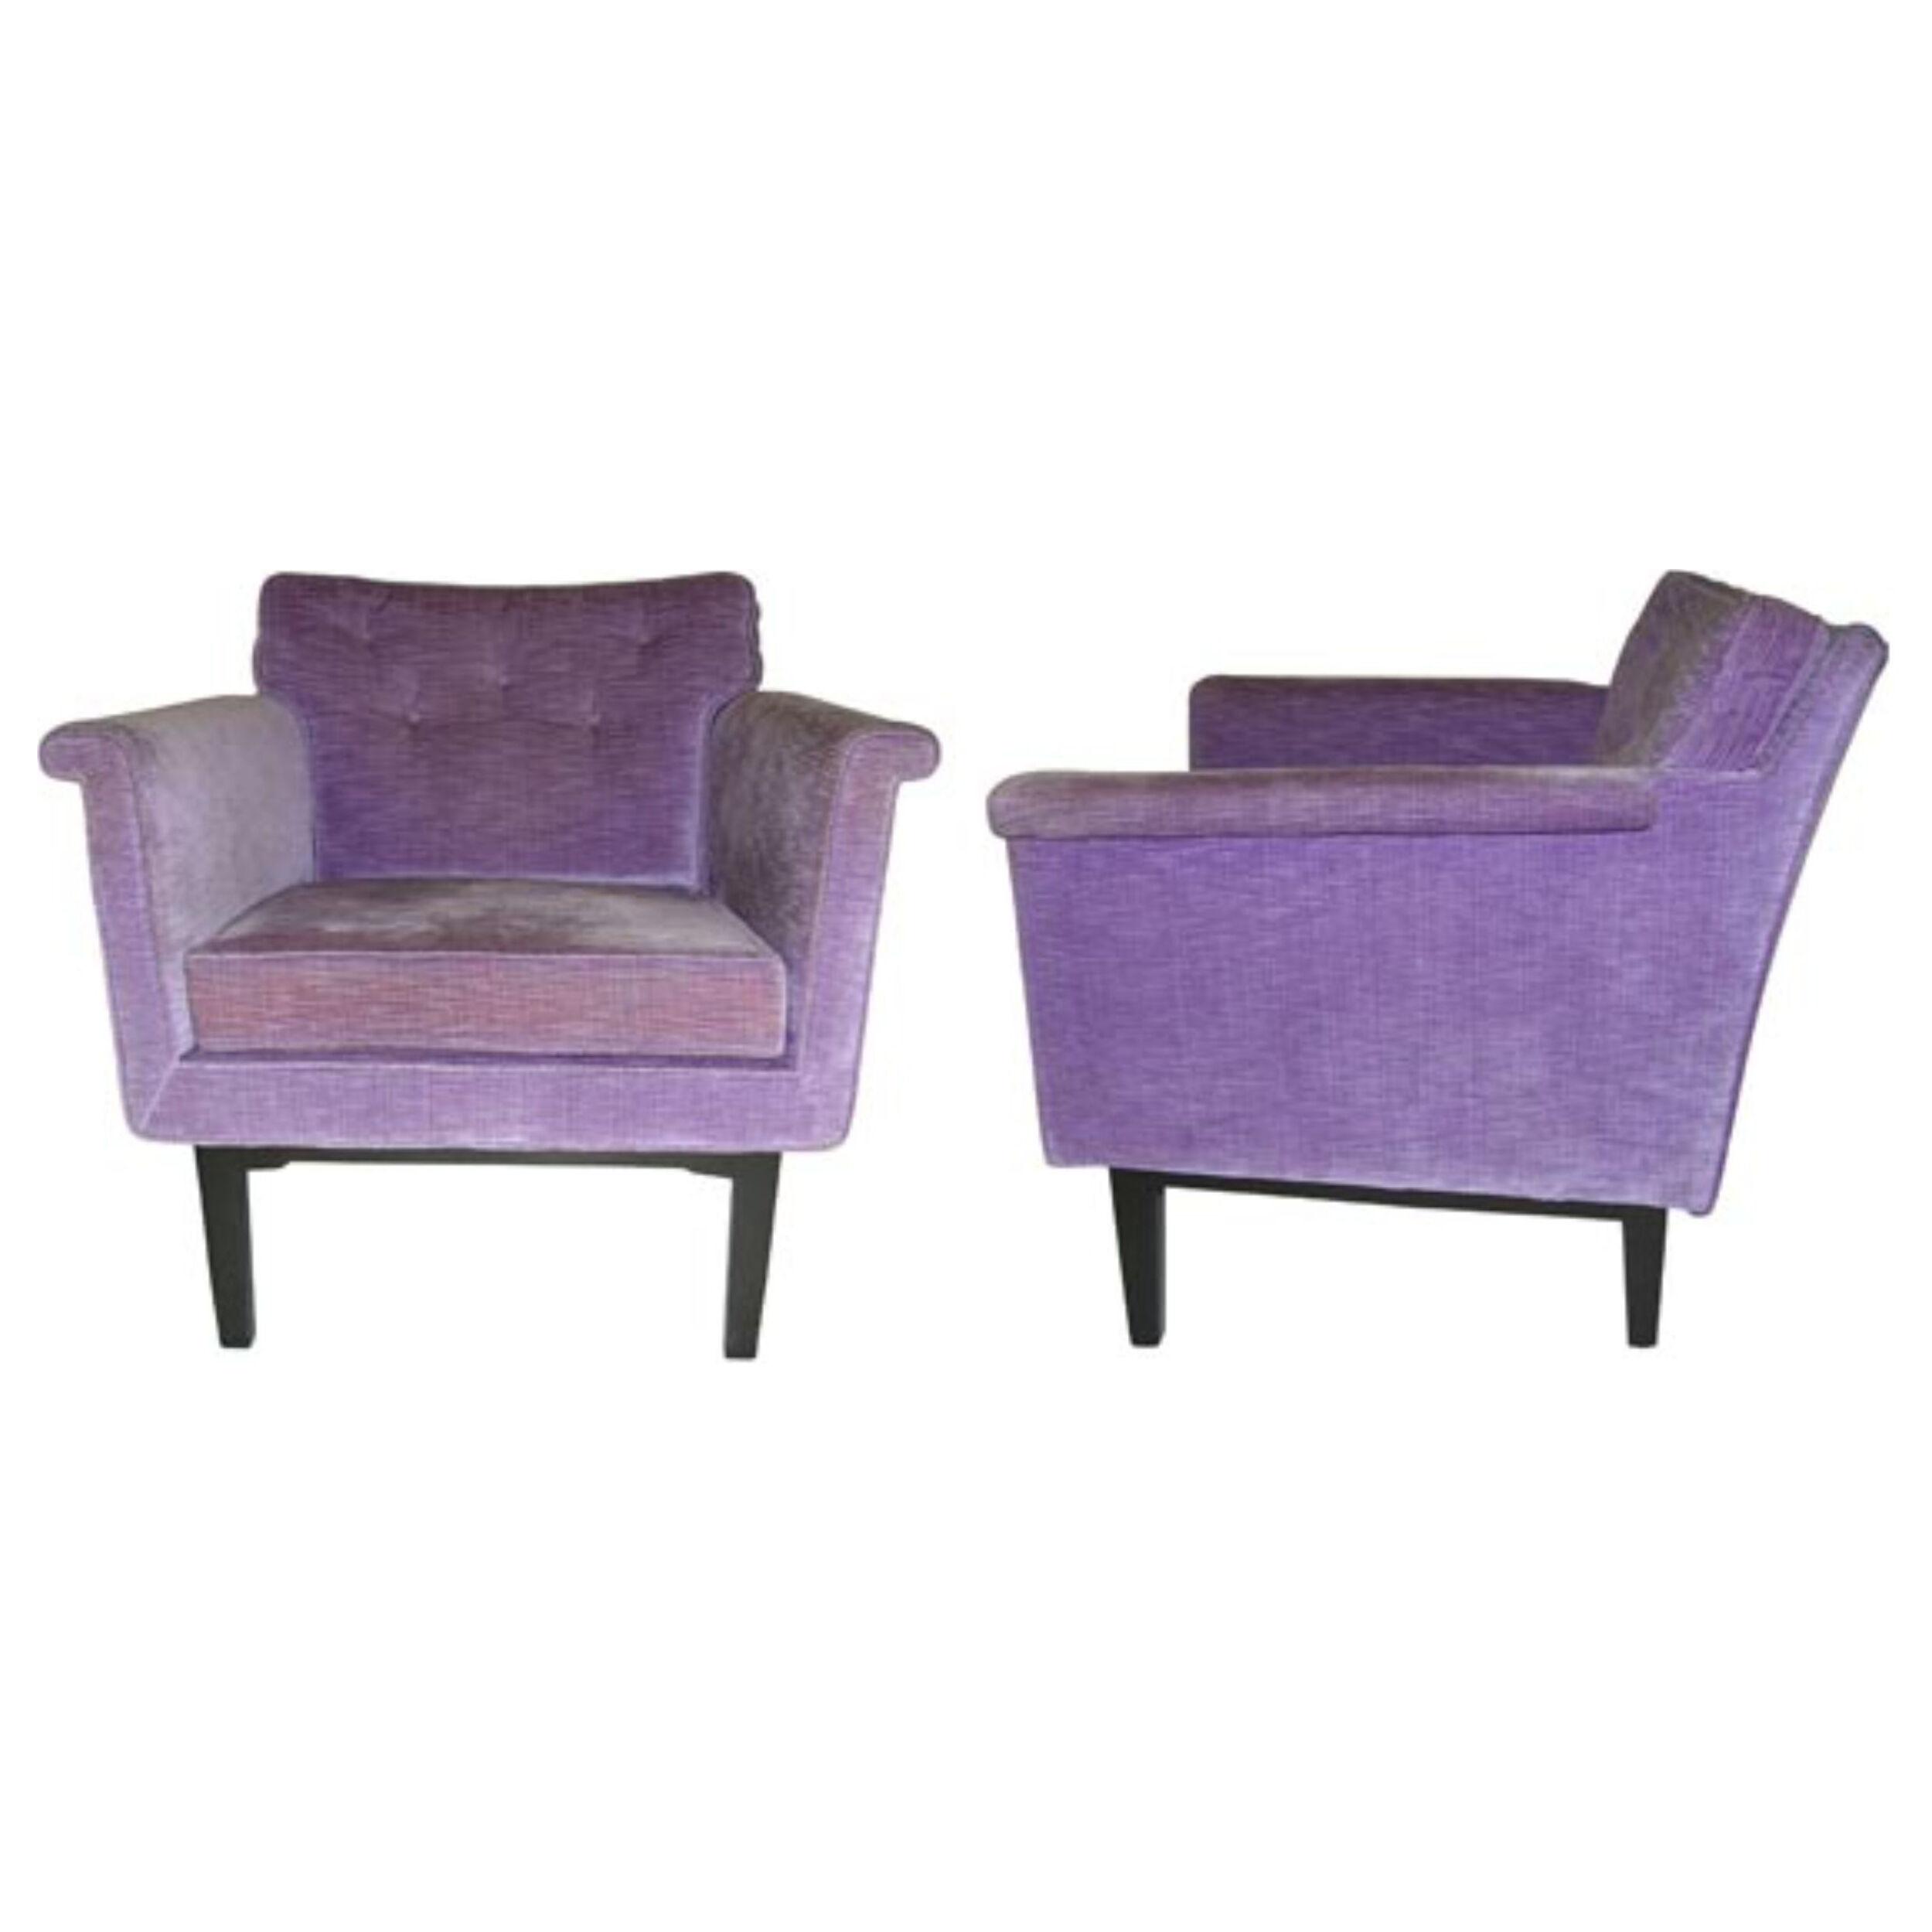 Pair of Club Chairs by Edward Wormley for Dunbar